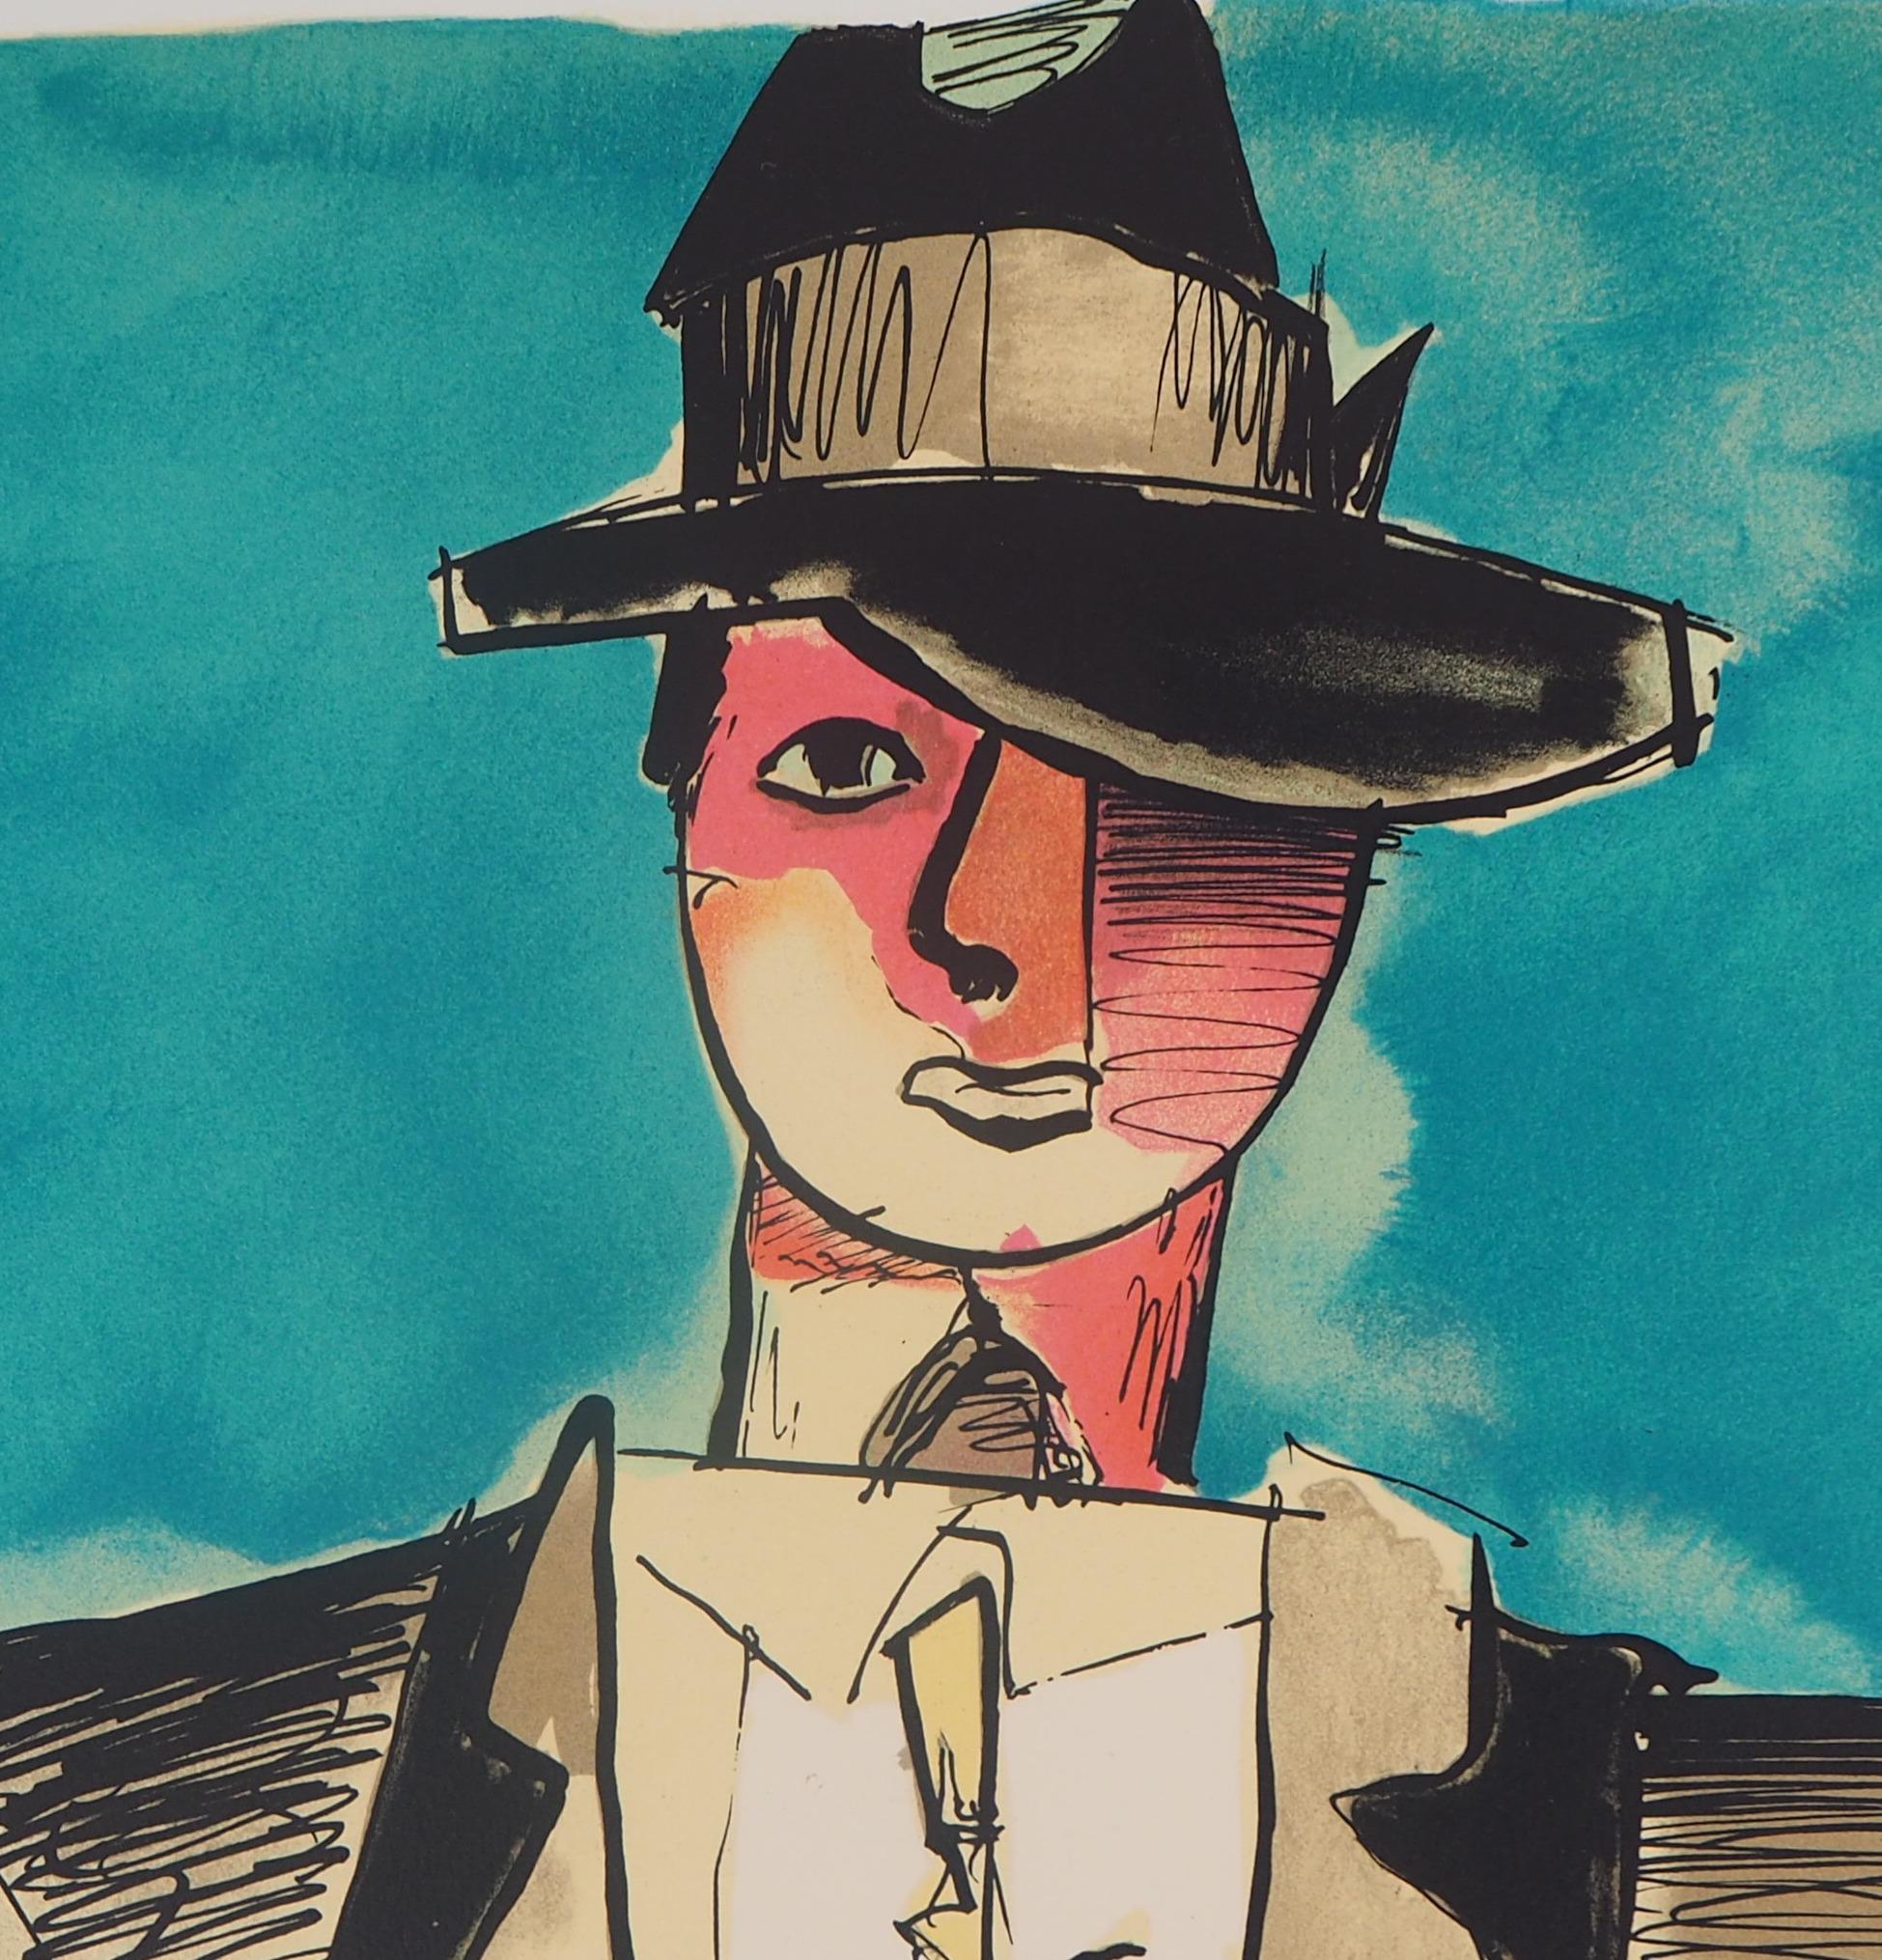 Jean HELION
Elegant Man with a Hat

Original lithograph
Handsigned in pencil
Numbered / 100 copies
On Arches vellum 65 x 50cm (c.26 x 20